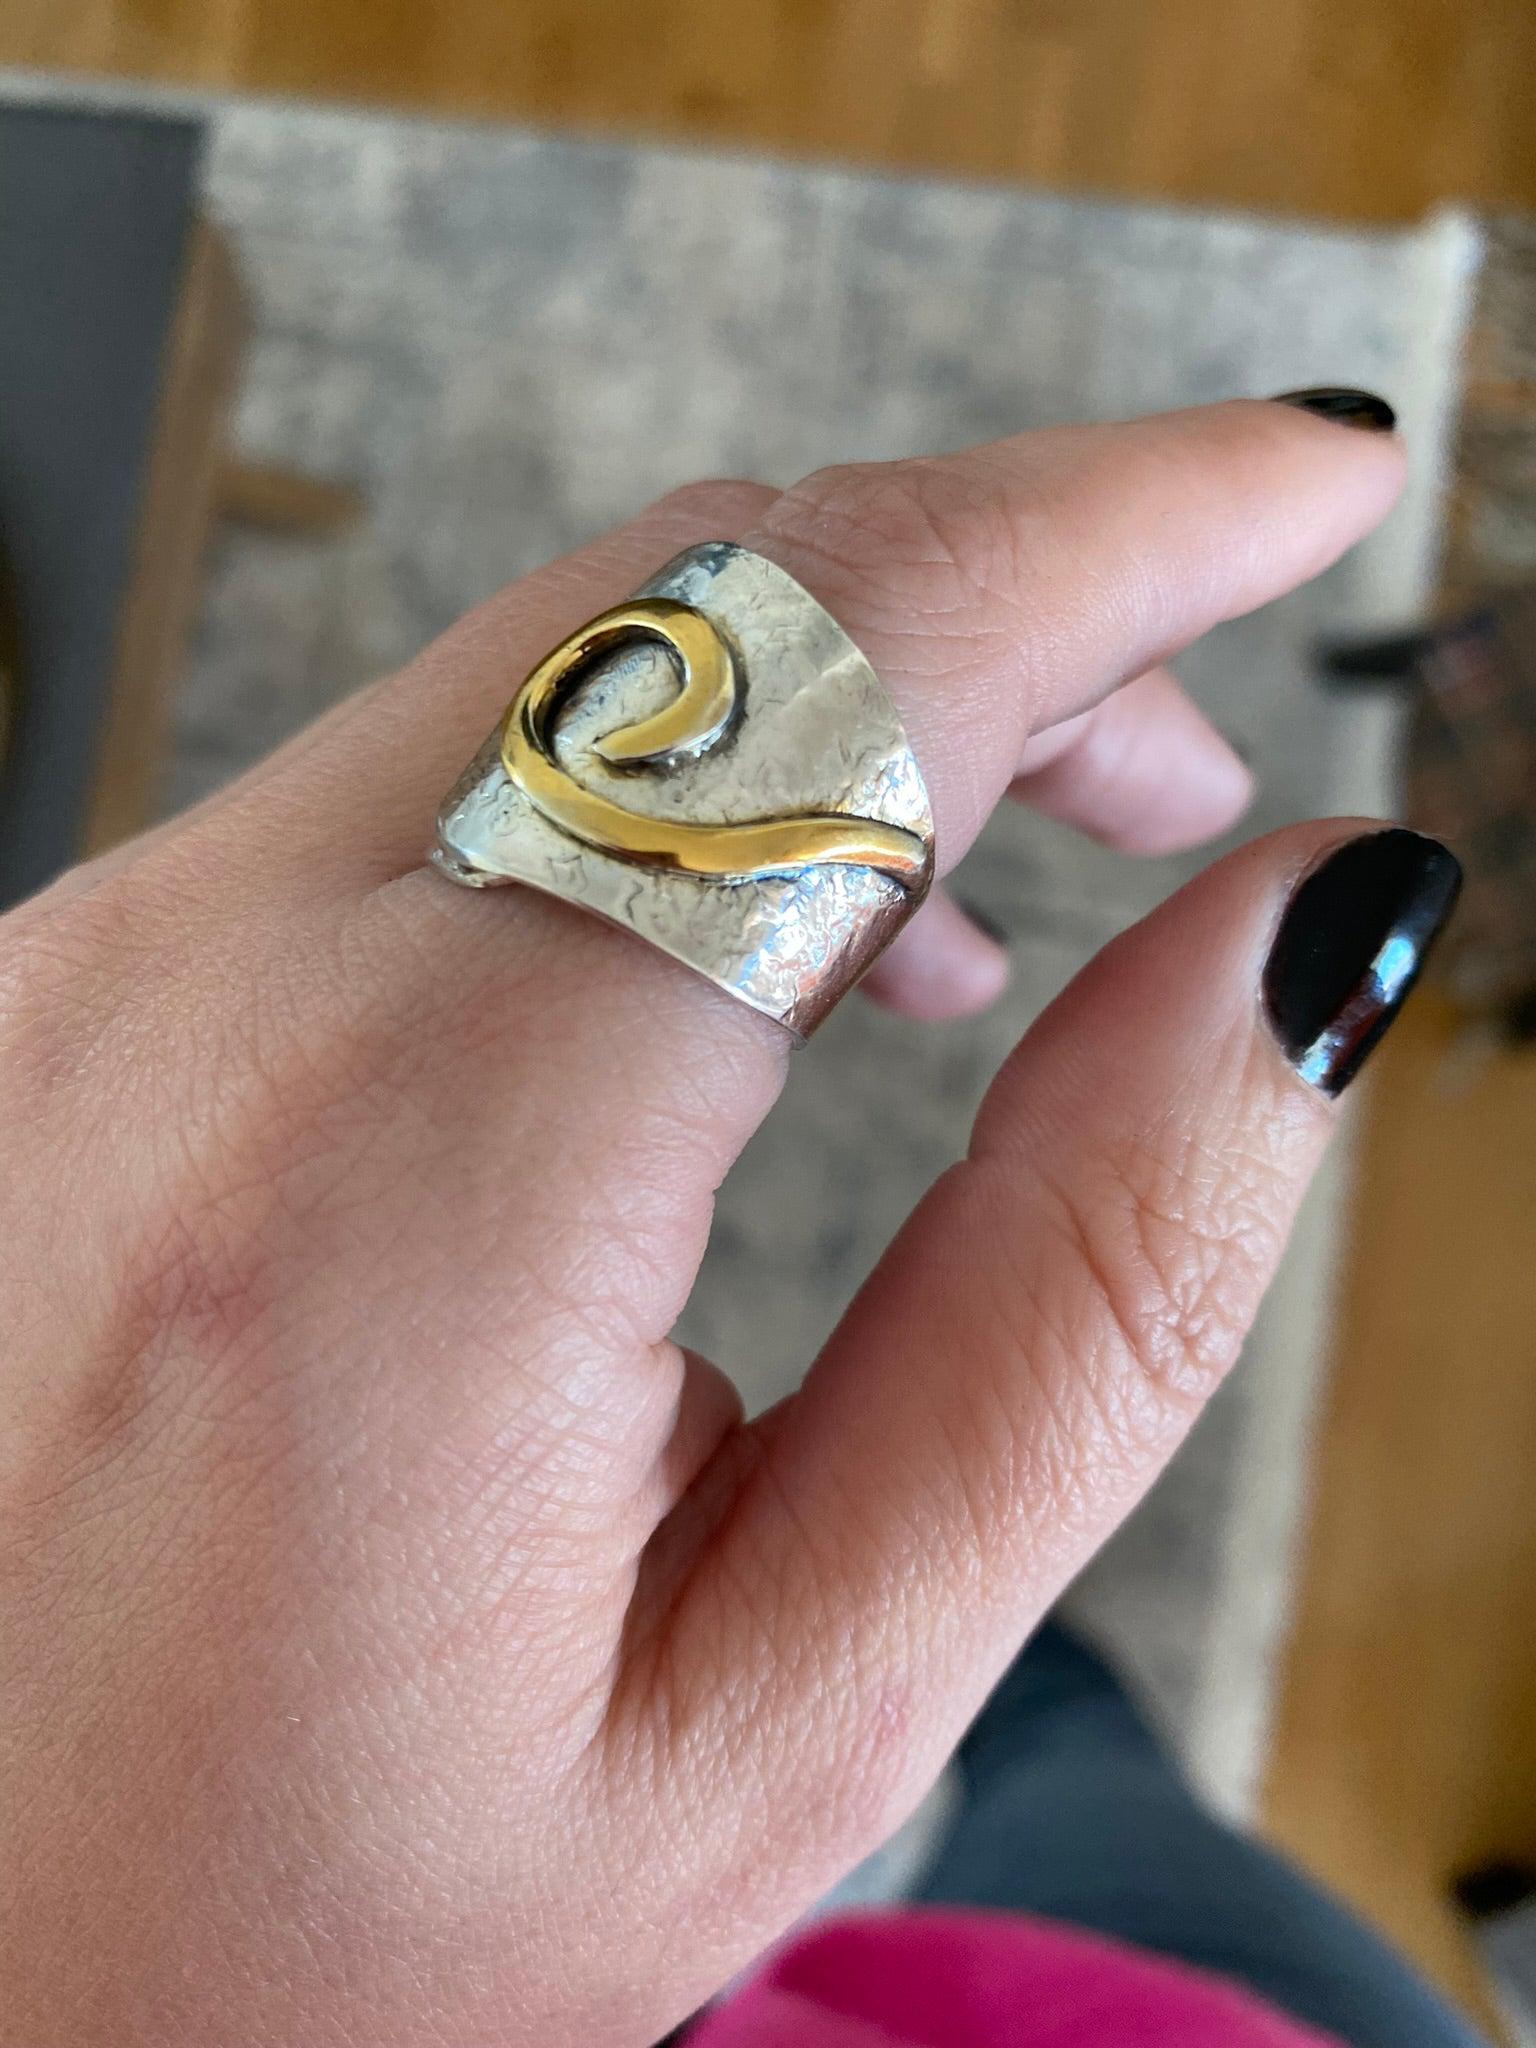 Ring in Sterling Silver with Decorative Black Patina (Oxidation) (DM-36)